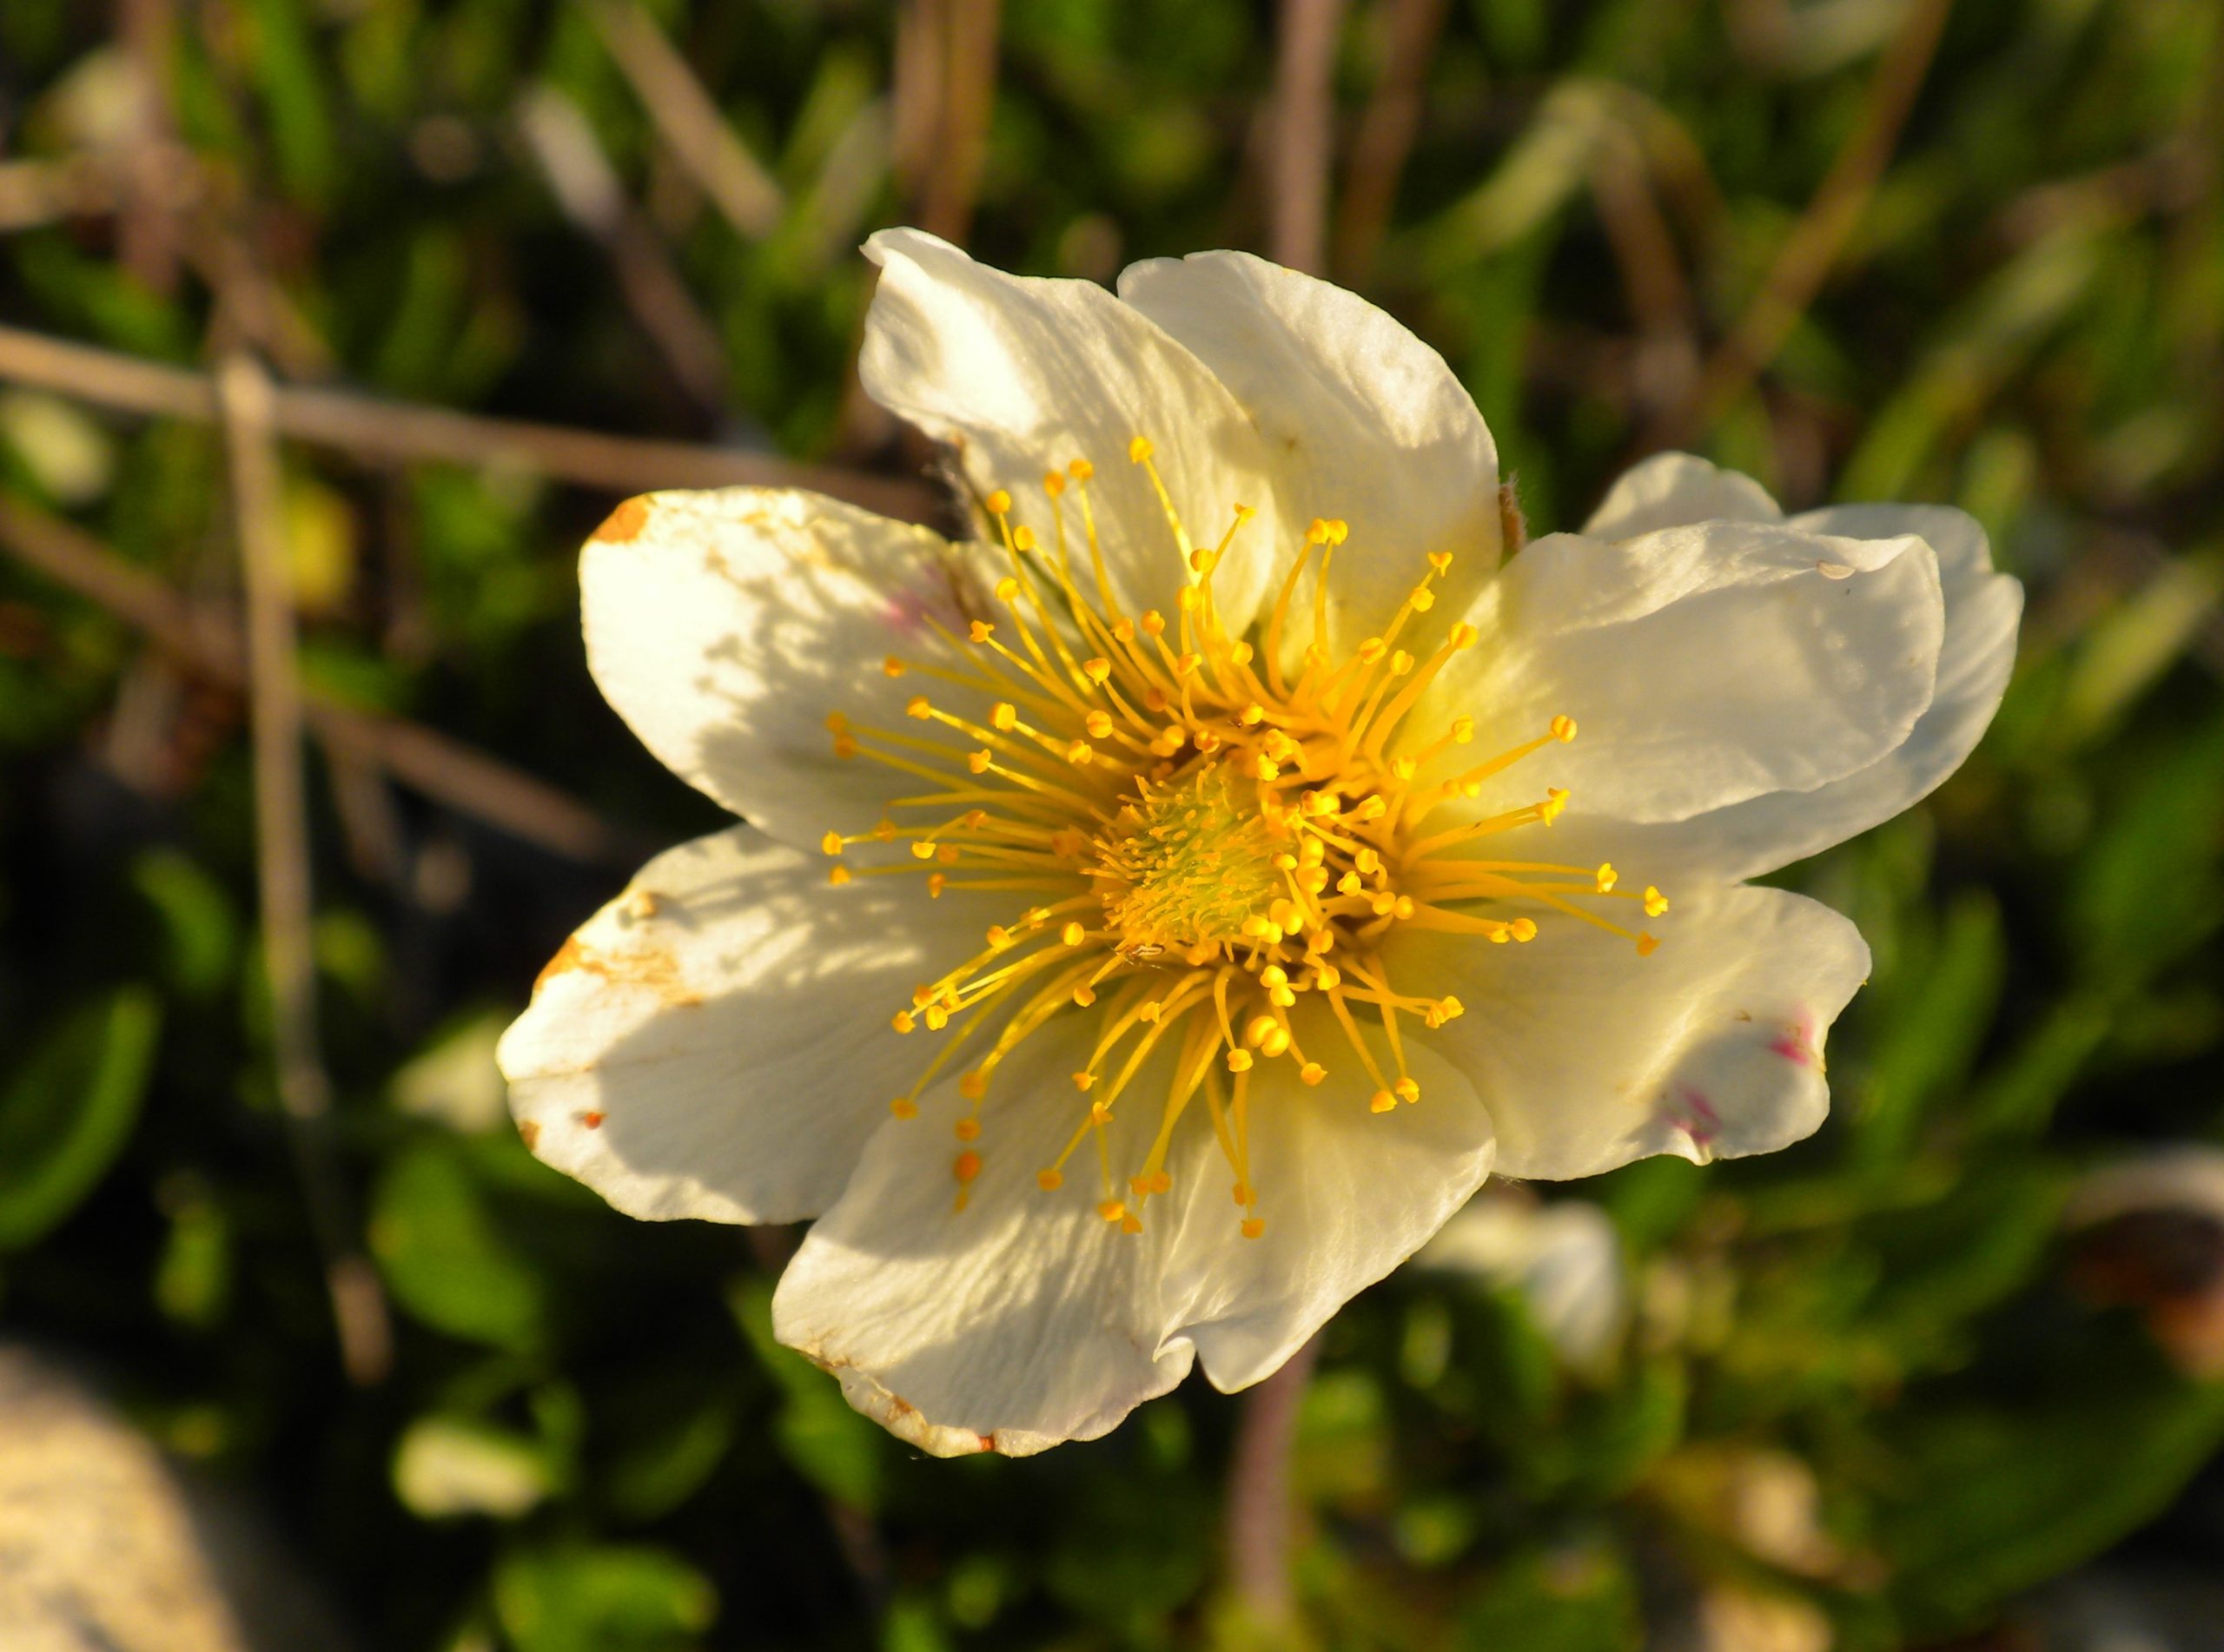 Close up of a white flower with a yellow centre.